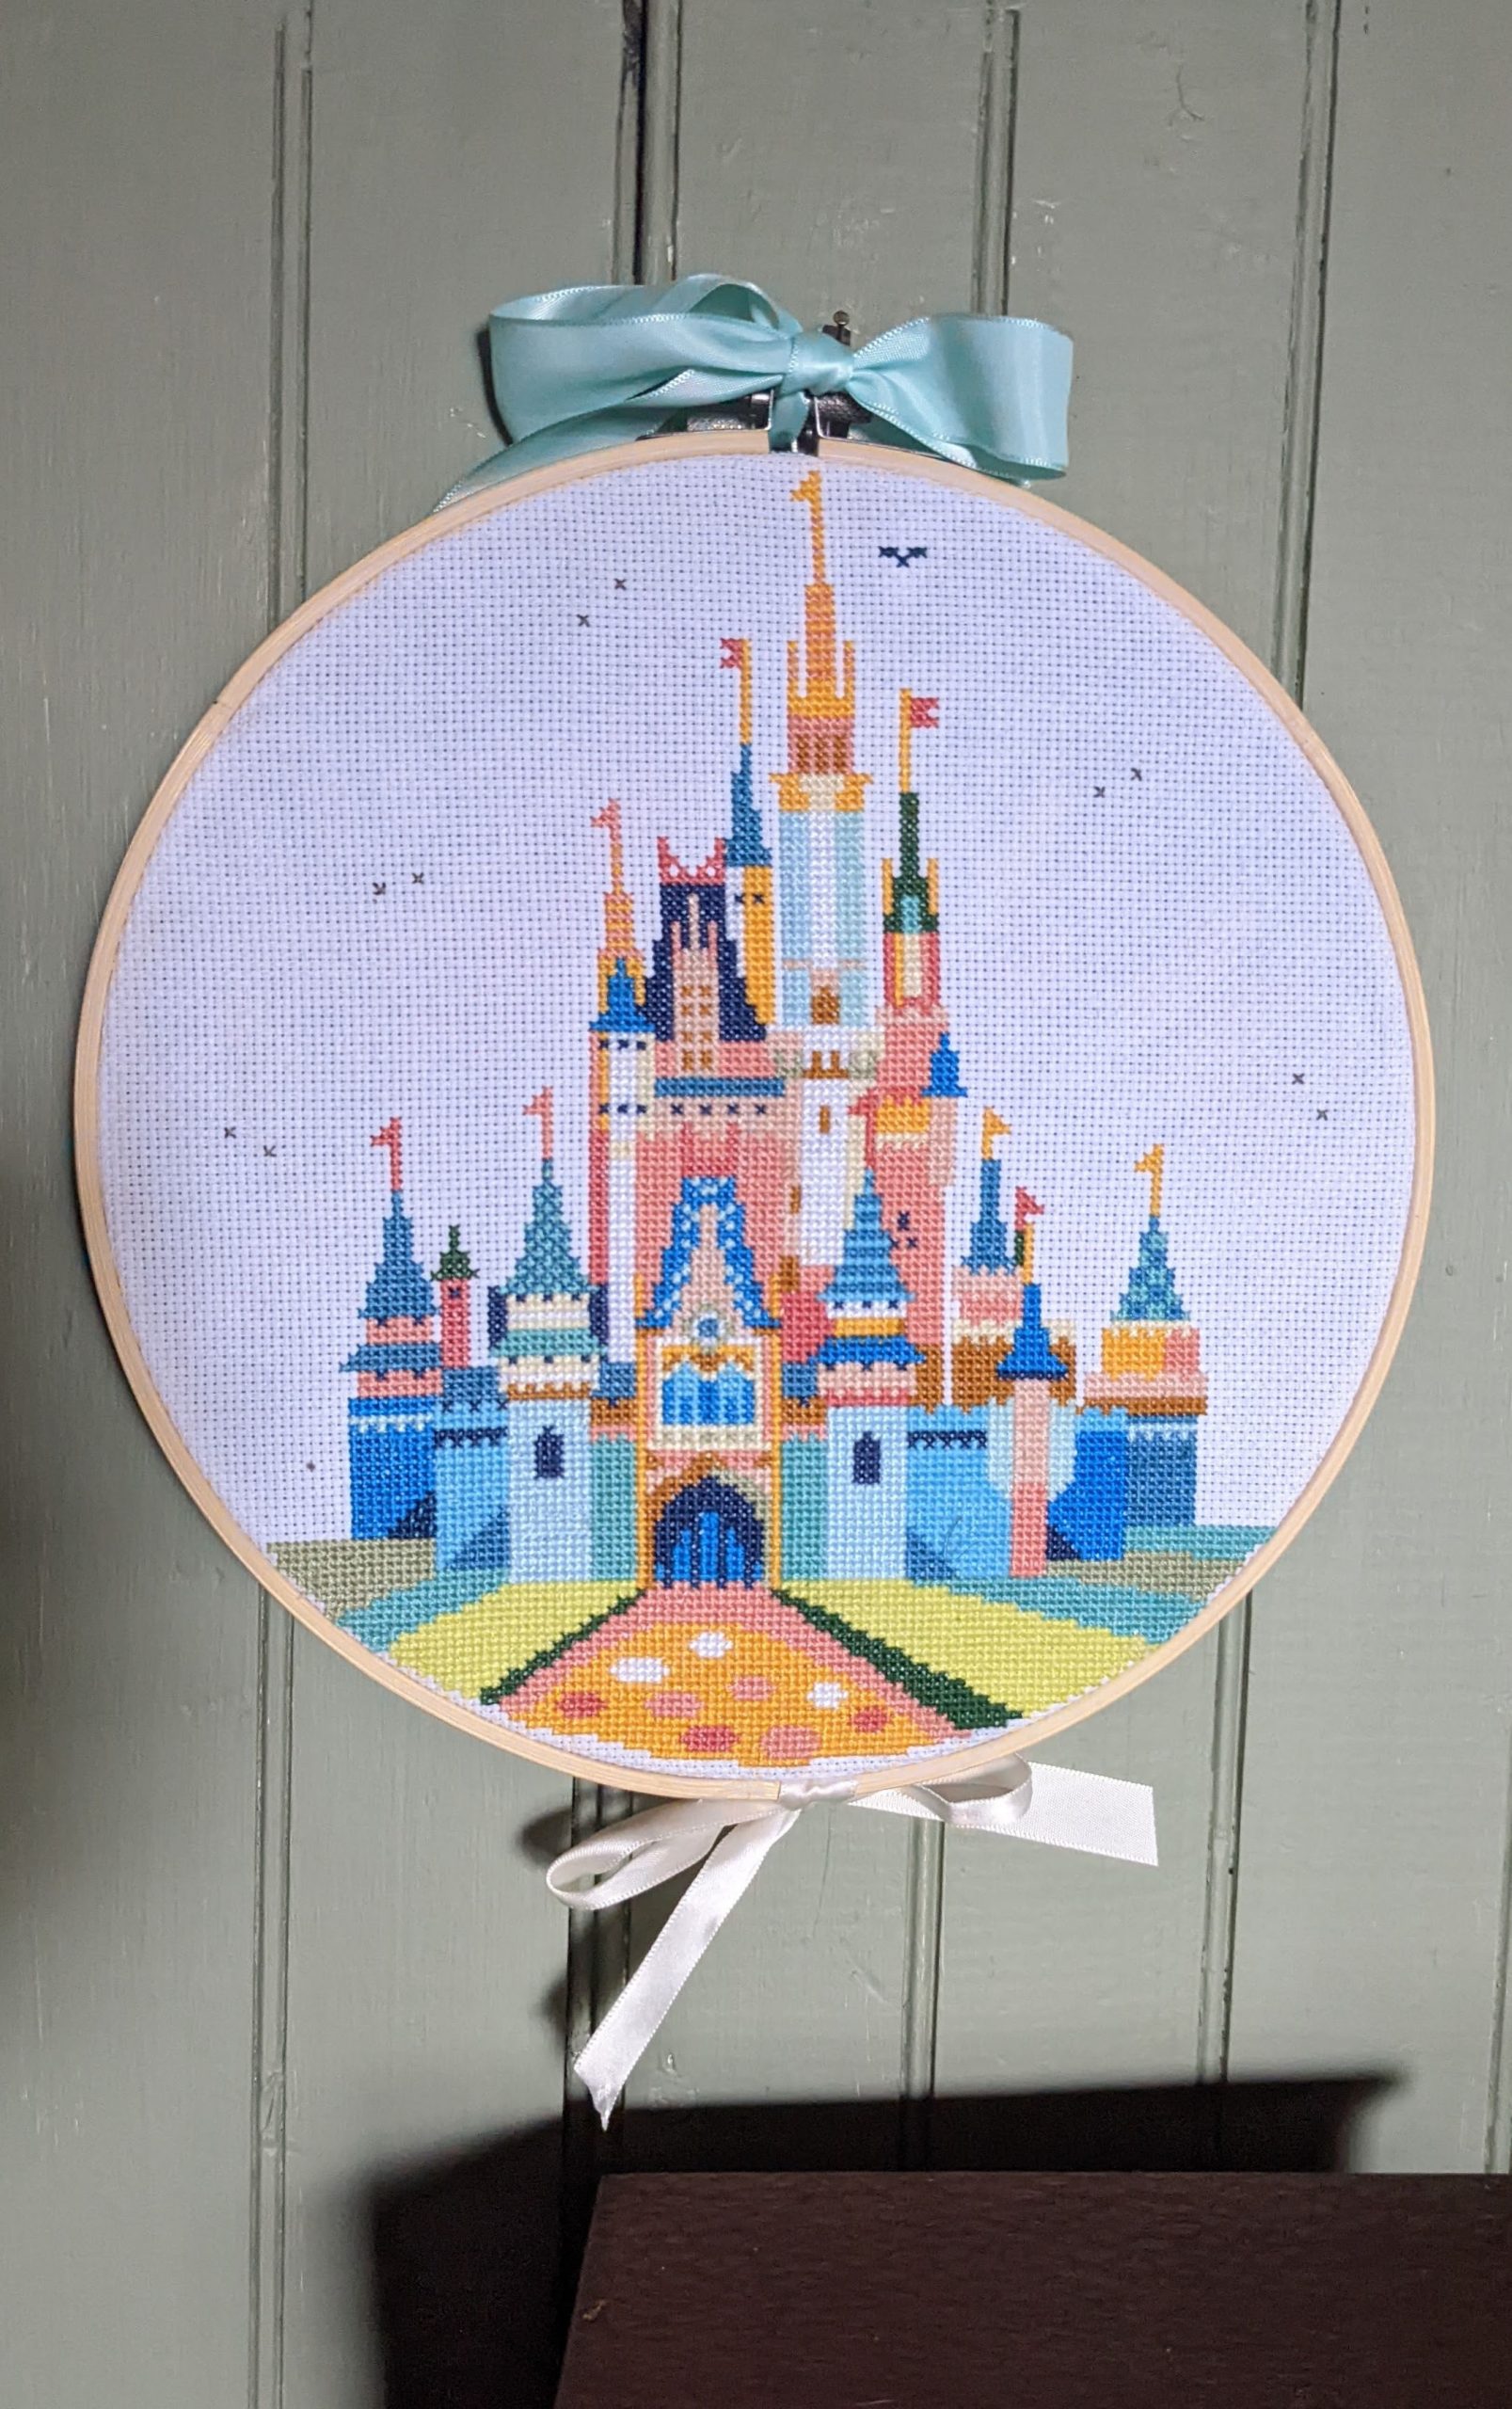 Image of a colorful cross stitch of the disney castle on a hoop with bows on a green headboard wall